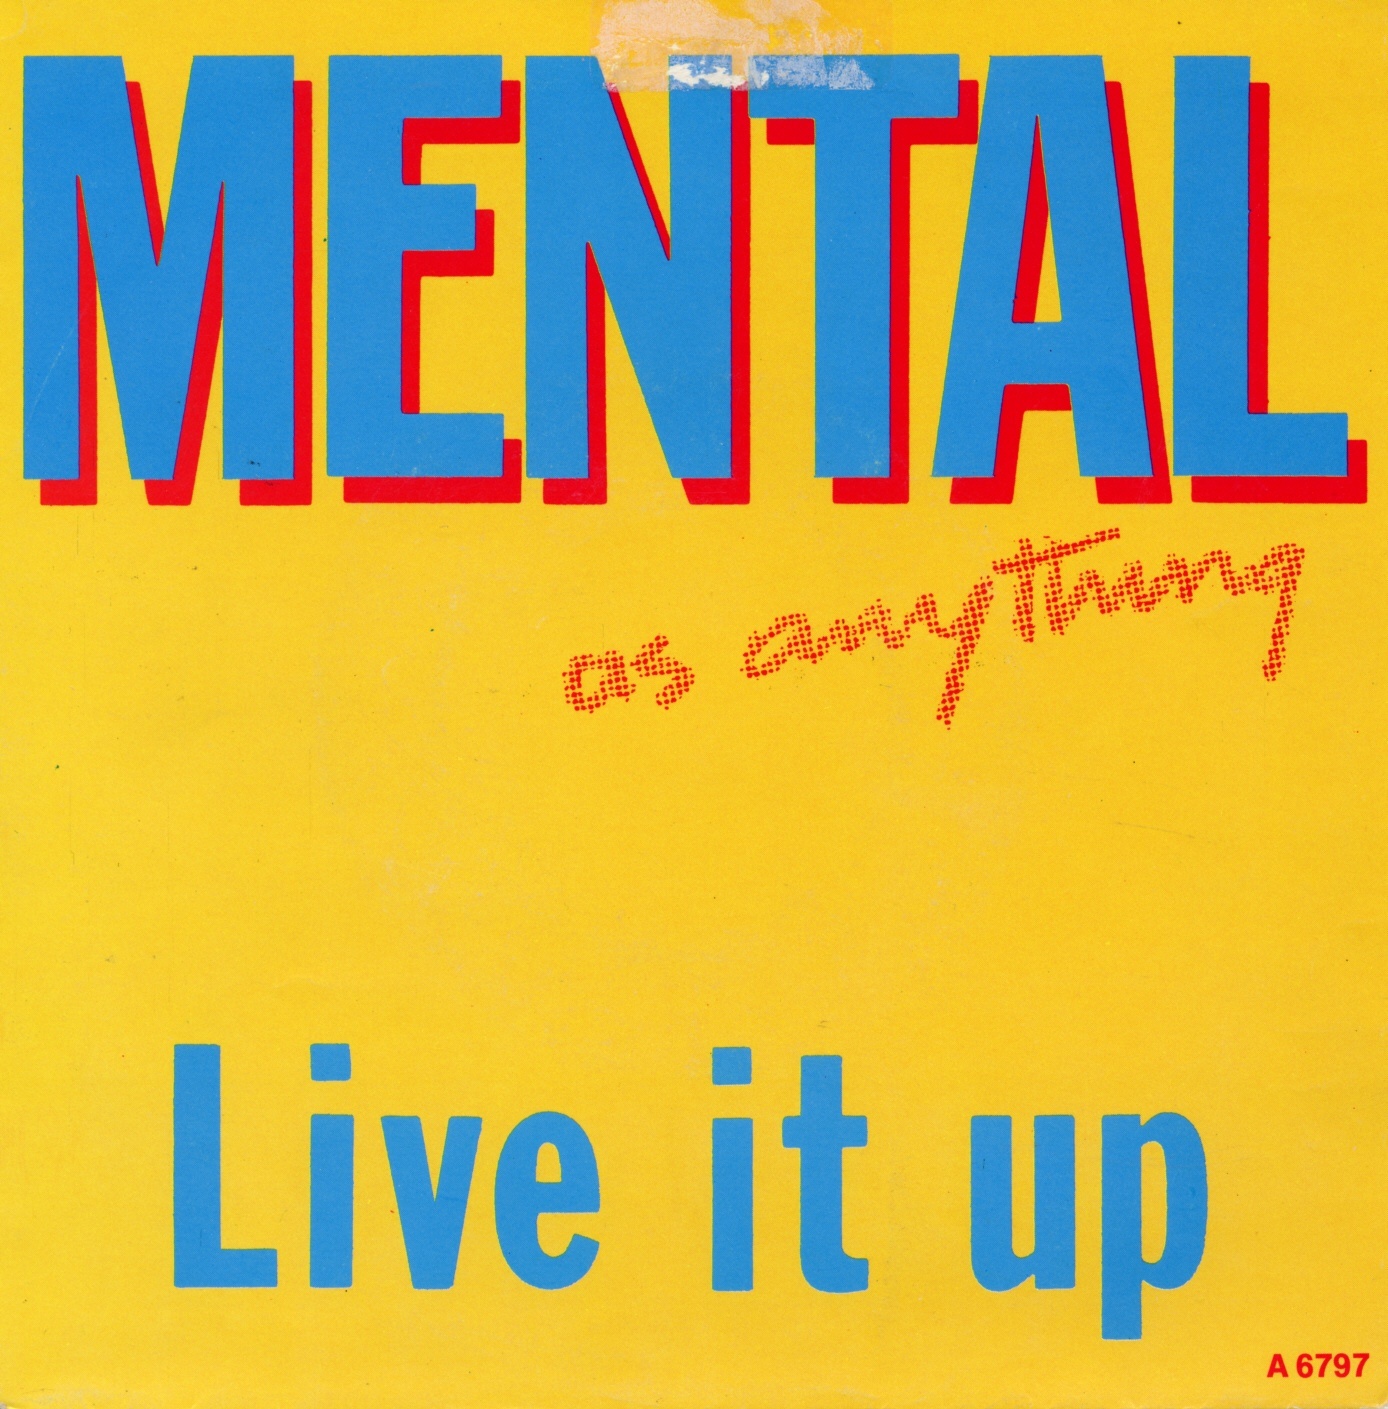 Live it up 2. Live it up. Living it up обложка. Toronto Live it up 1986. Hollywood Live it up 1986.